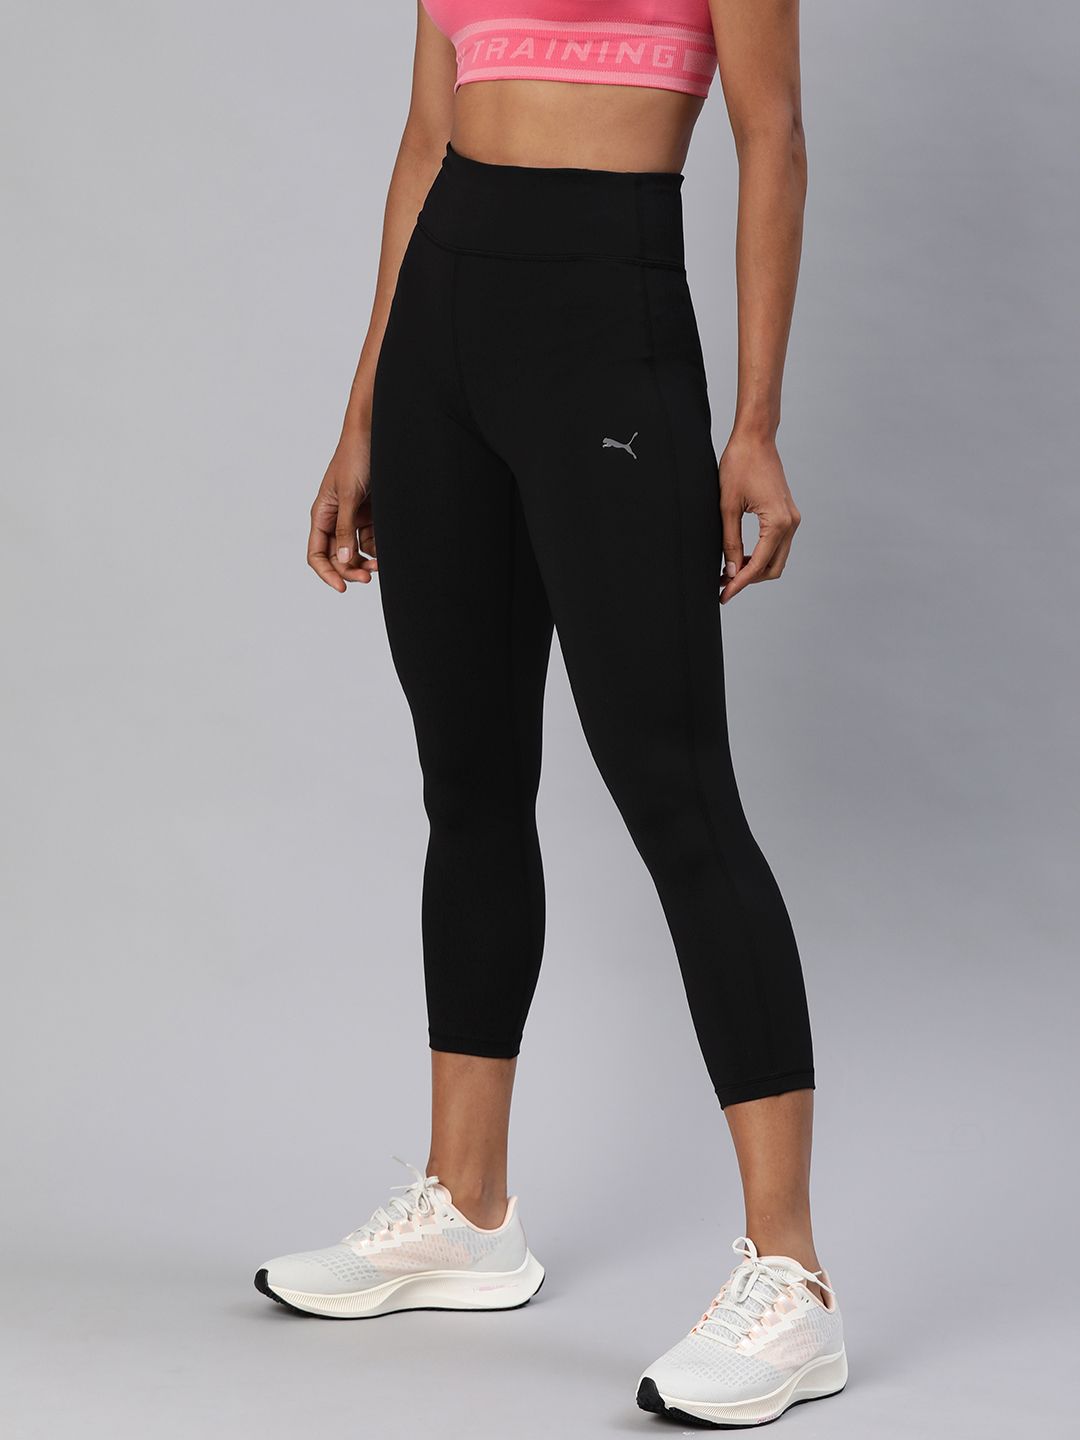 Puma Women Black Solid Training Favorite Solid High Rise 3 4 Training Tights Price in India